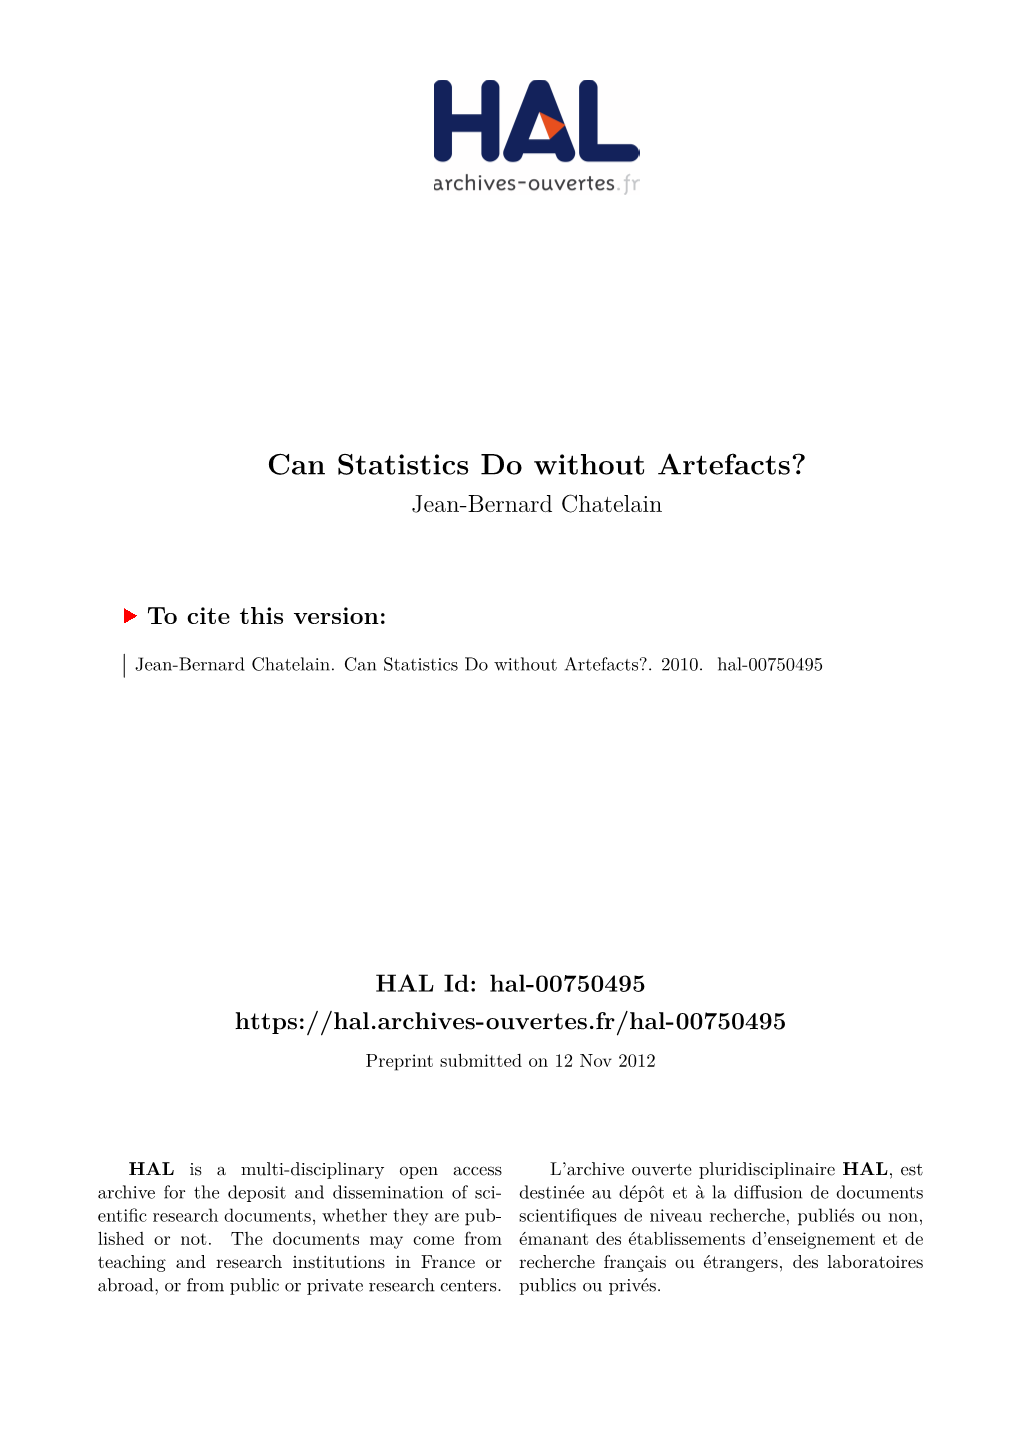 Can Statistics Do Without Artefacts? Jean-Bernard Chatelain